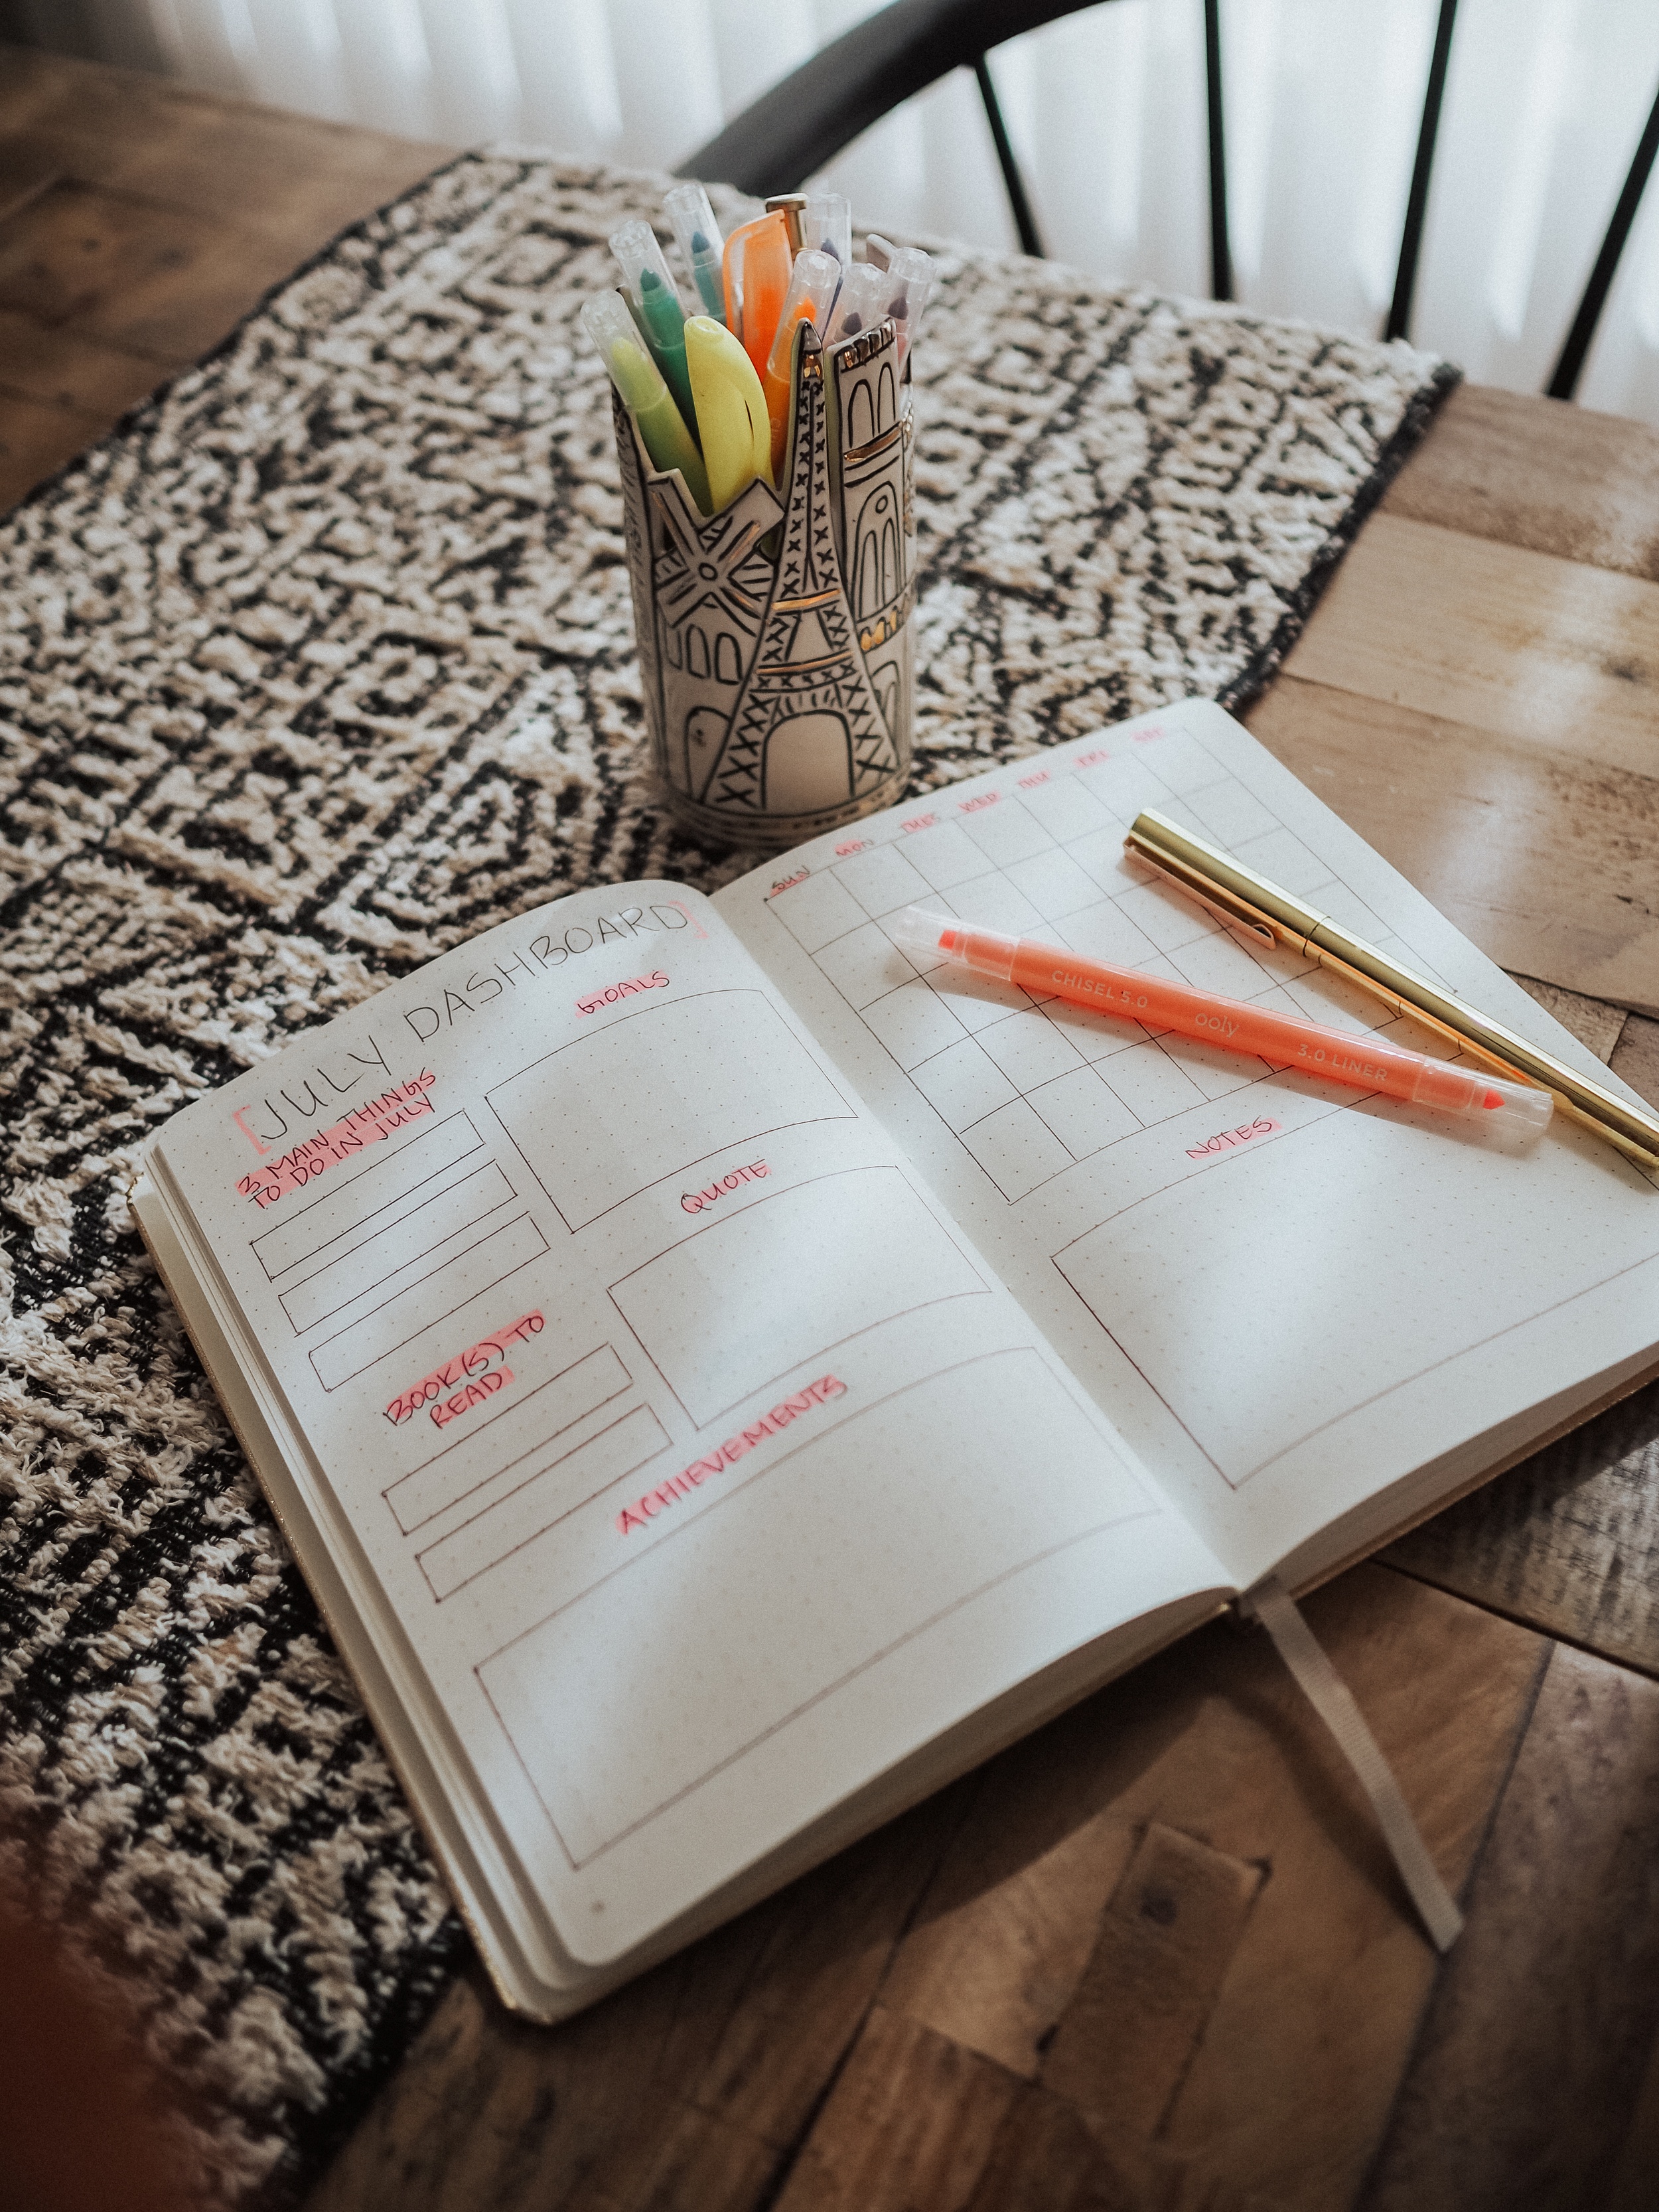 Create the bullet journal of your dreams with this list of 100+ bullet journal ideas. Find creative bullet journal inspo in this post.